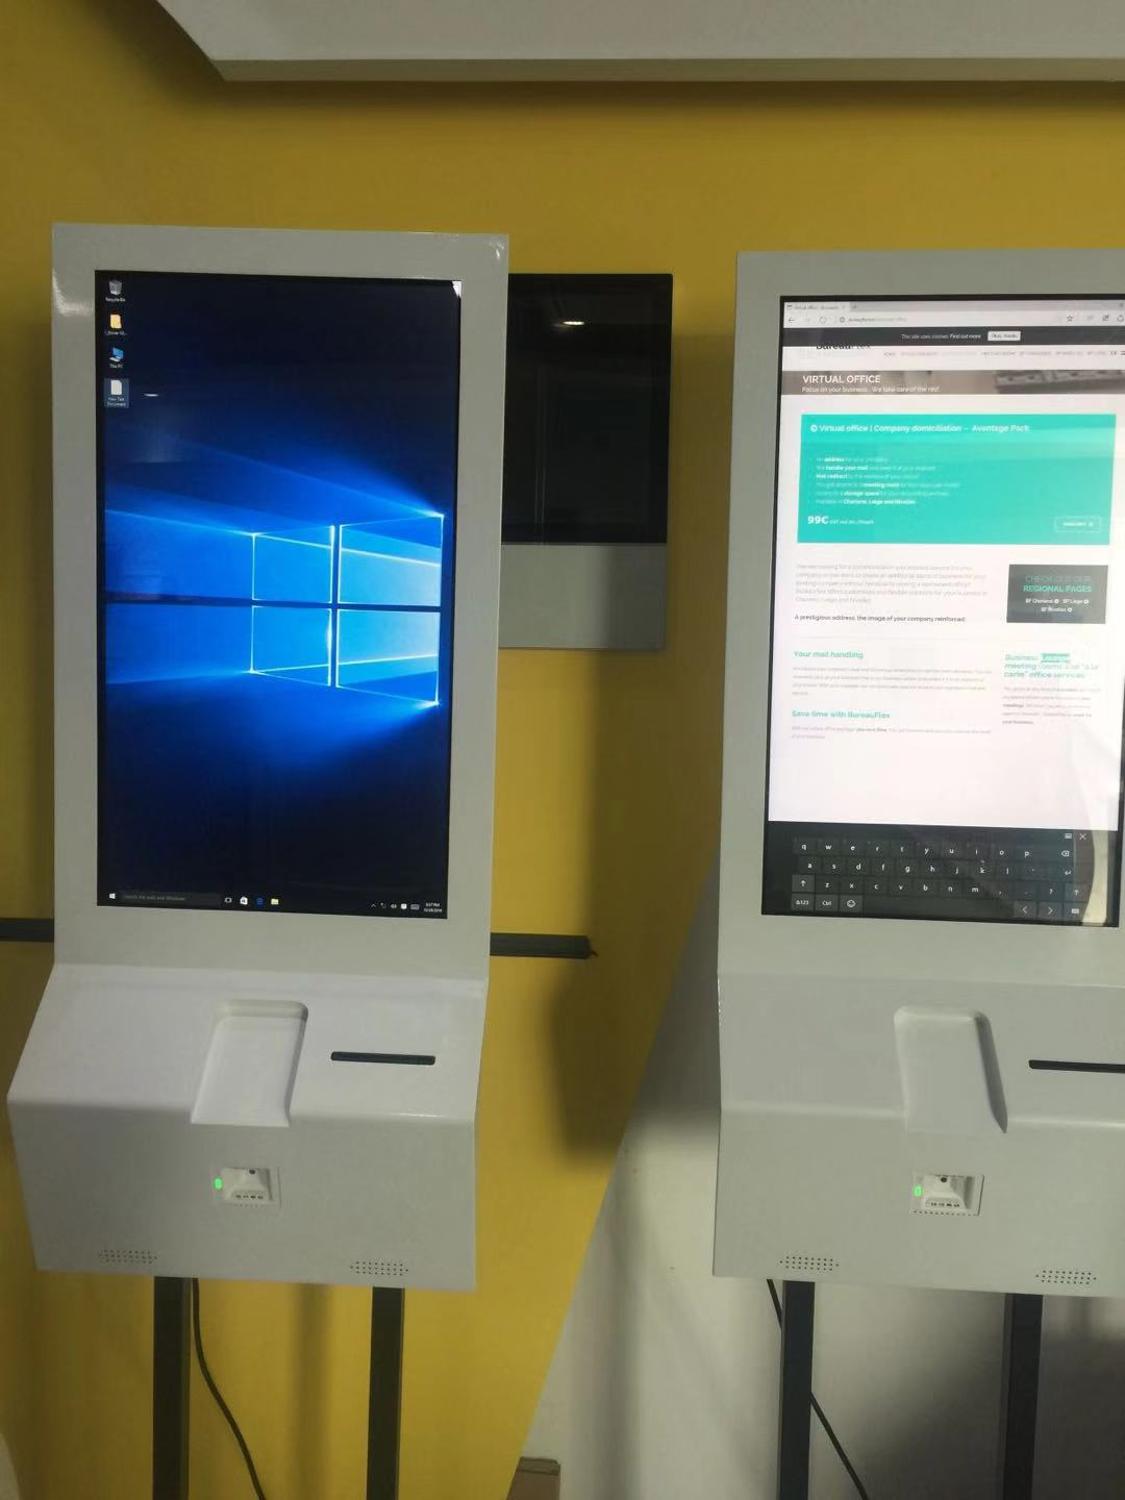 One-two-dimensional code scanning device built in camera and 4G modual and printer self service Ordering payment making Kiosk